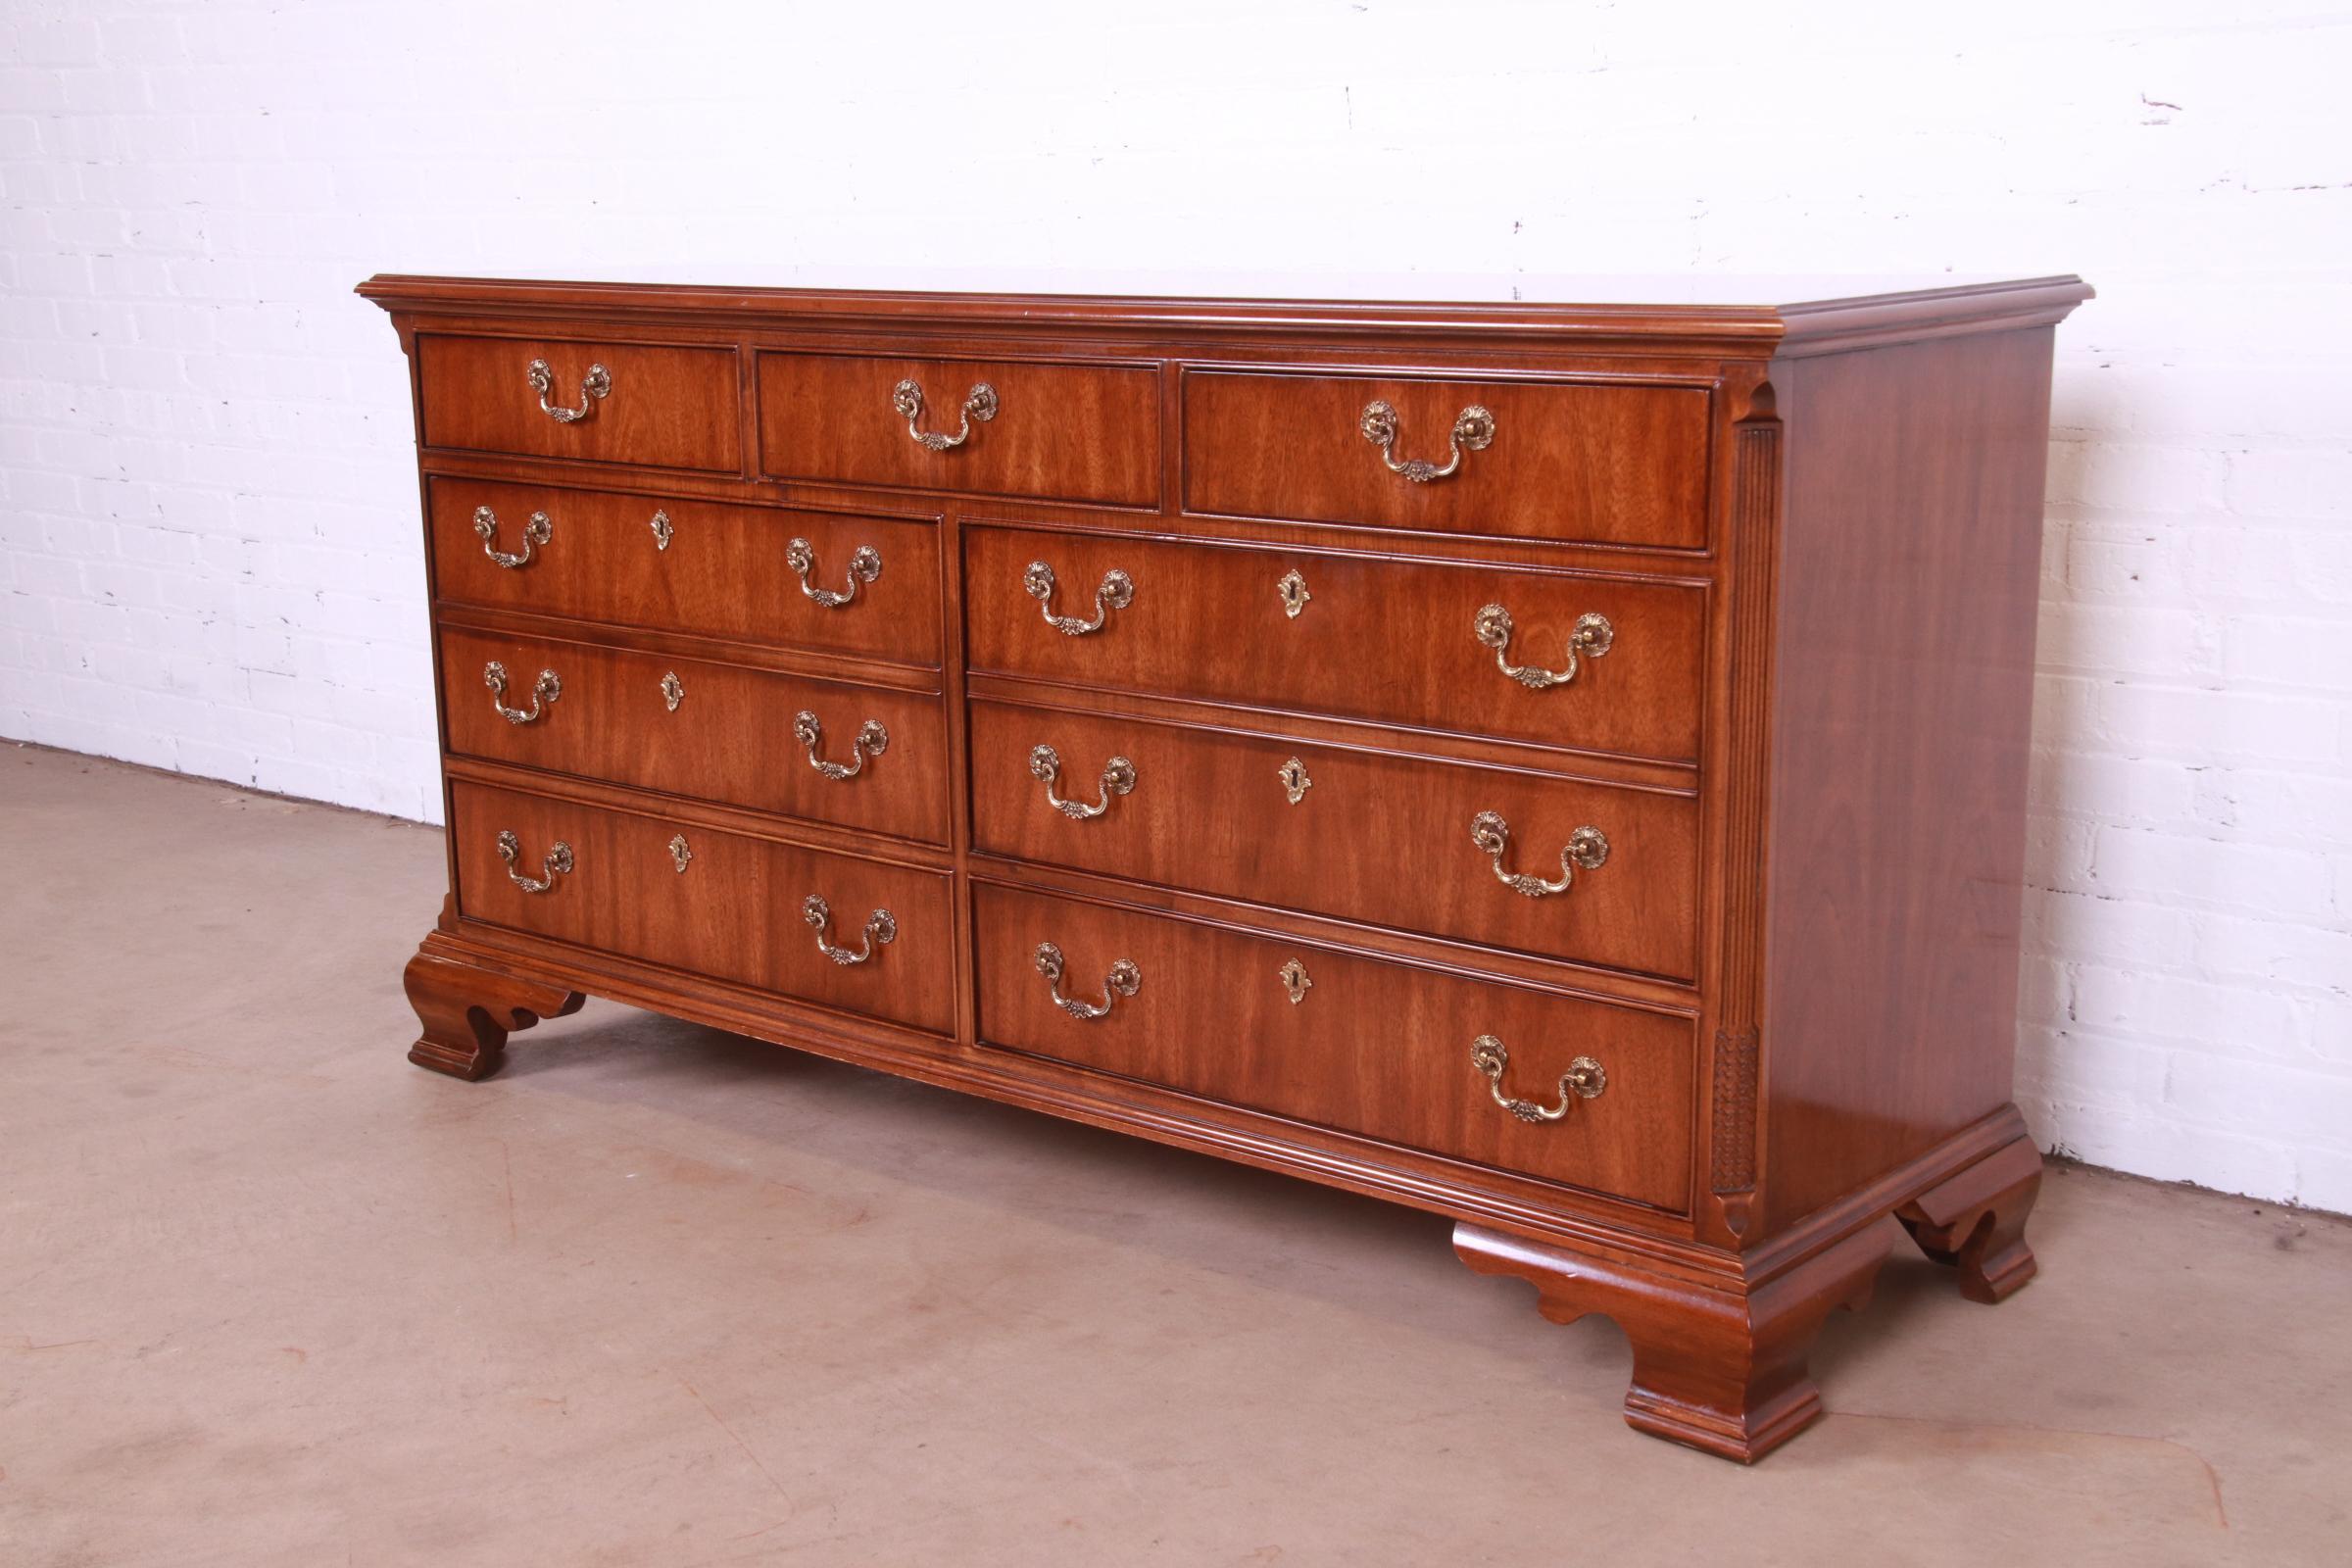 A gorgeous Georgian or Chippendale style dresser or credenza

By Drexel Heritage, 